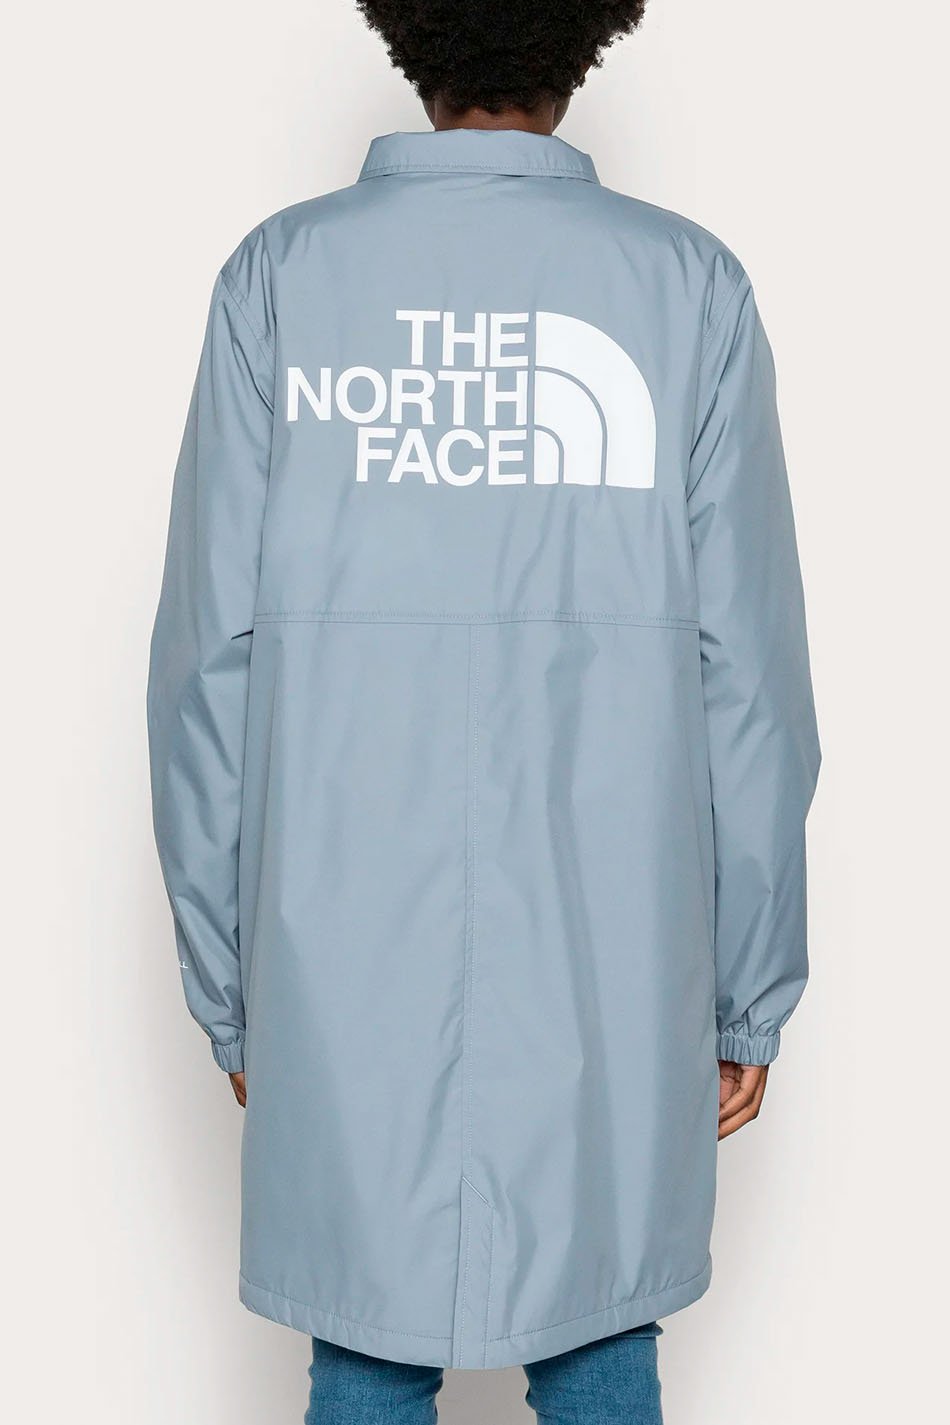 Jacke Coaches The North Face